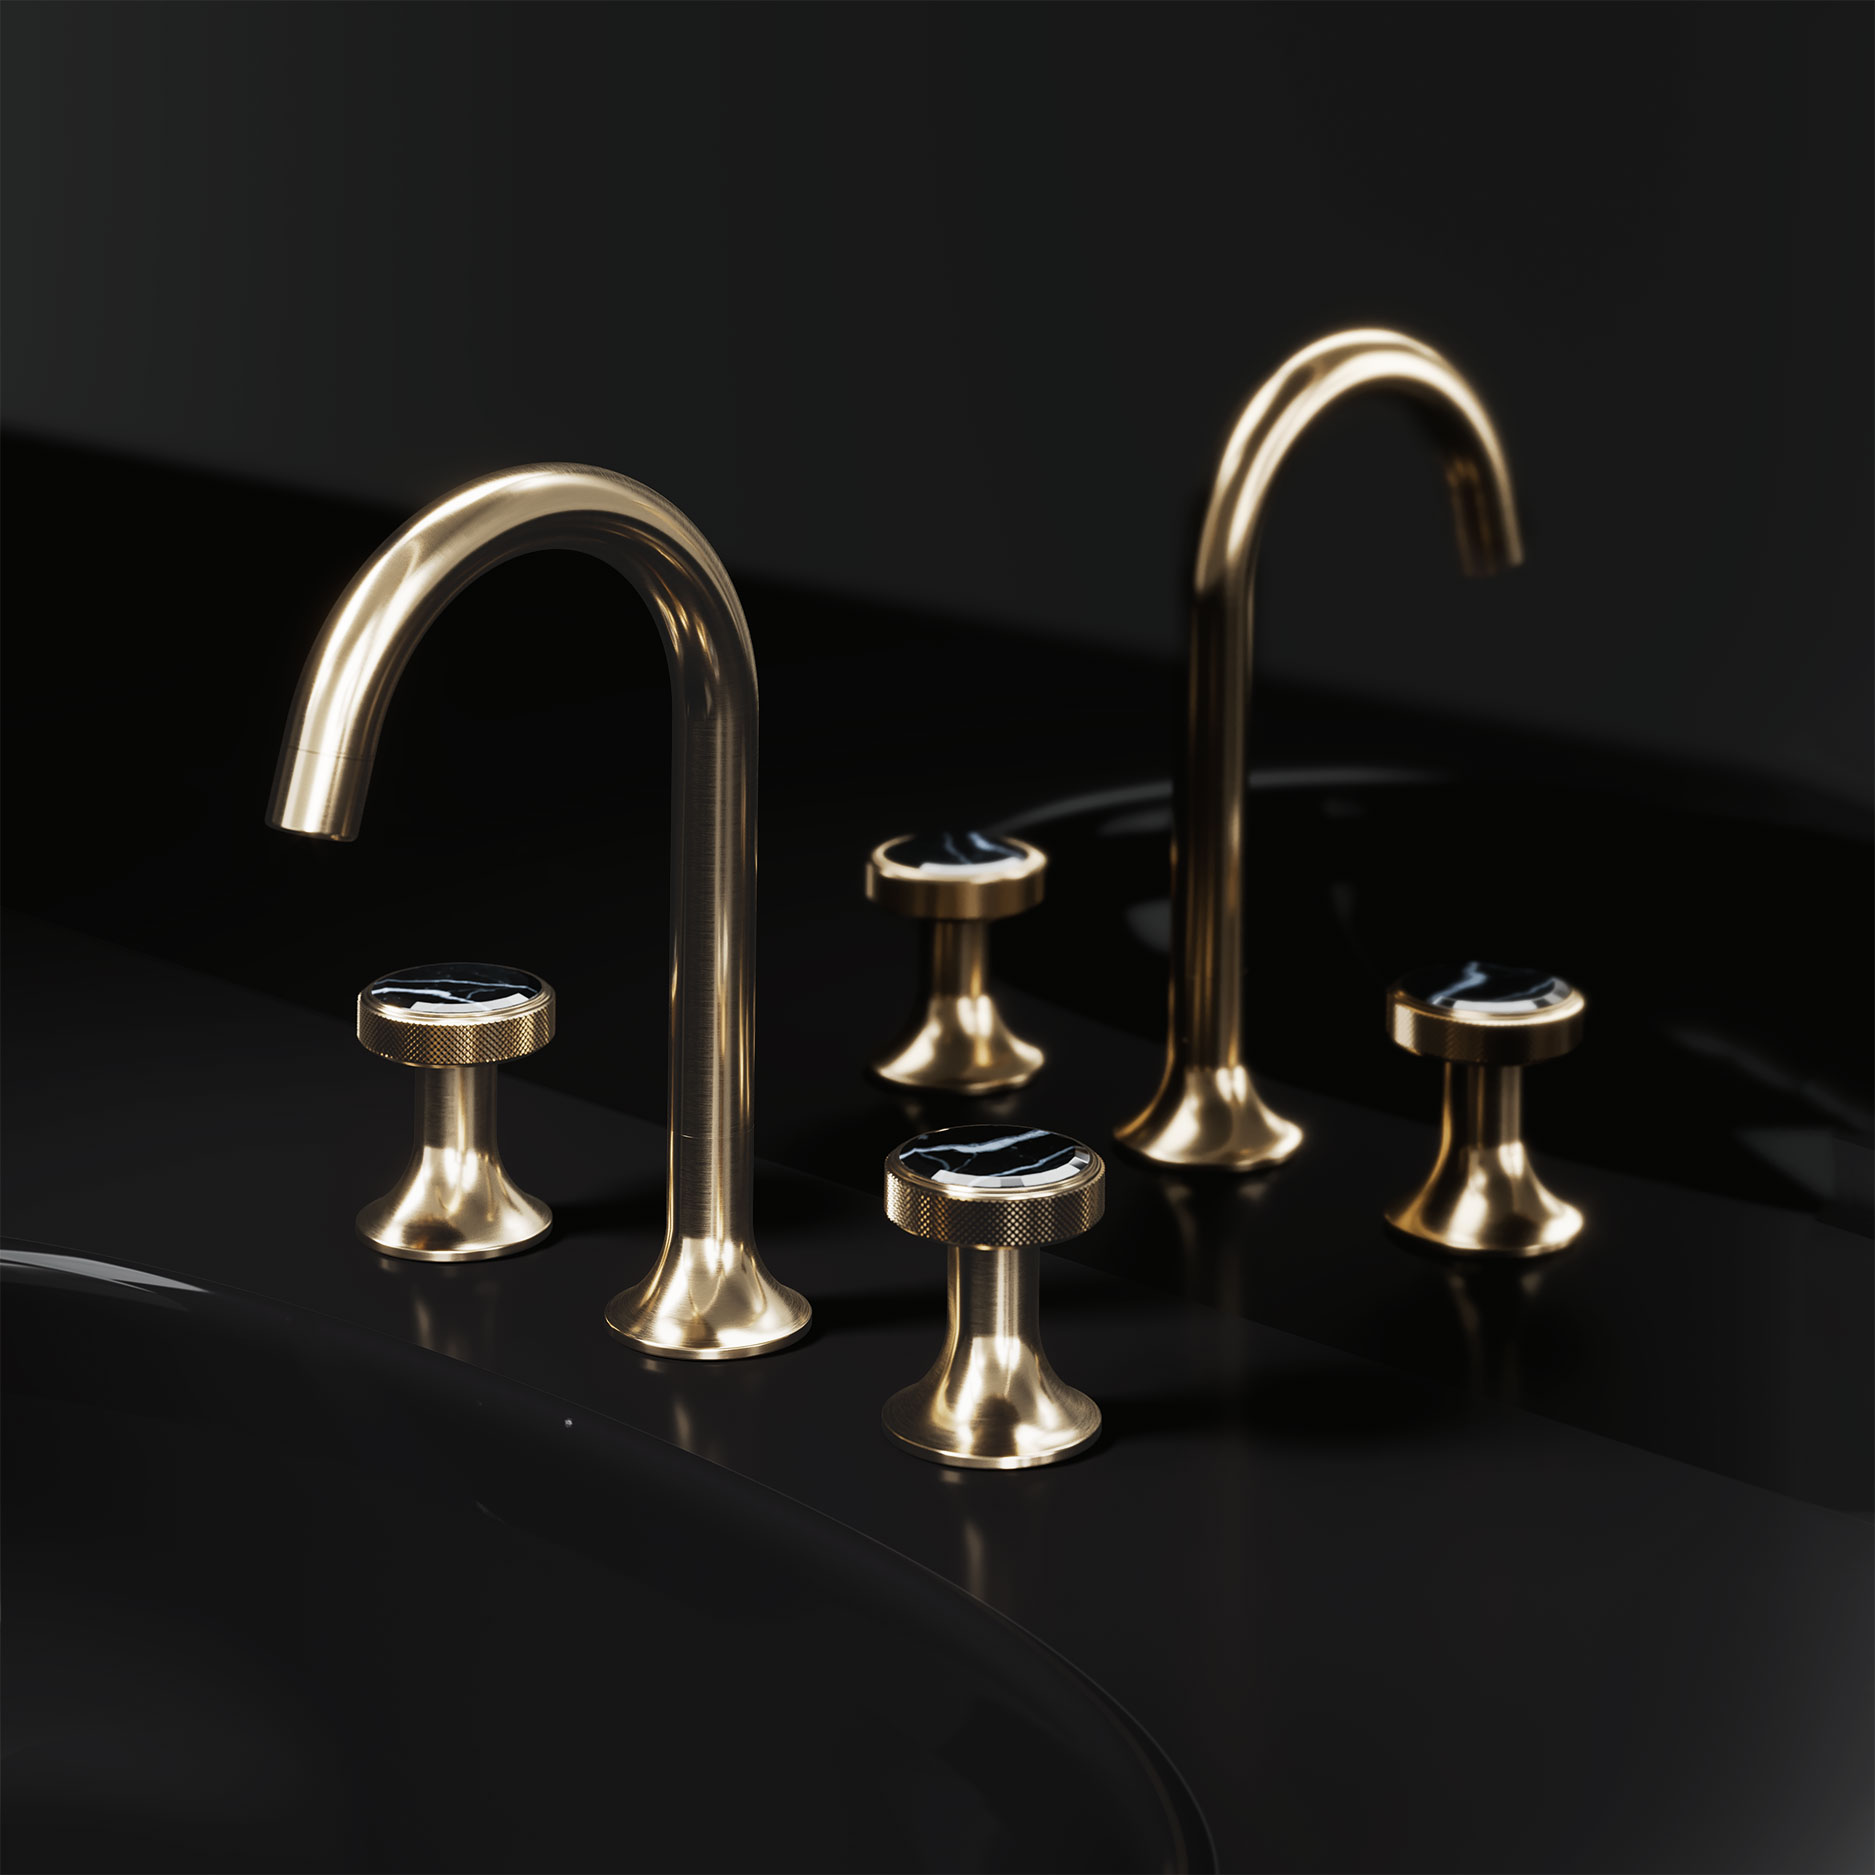 Luxury & Avant-garde and Bathroom with Accessories Exquisite glamorous shine - – Jörger Fittings moments